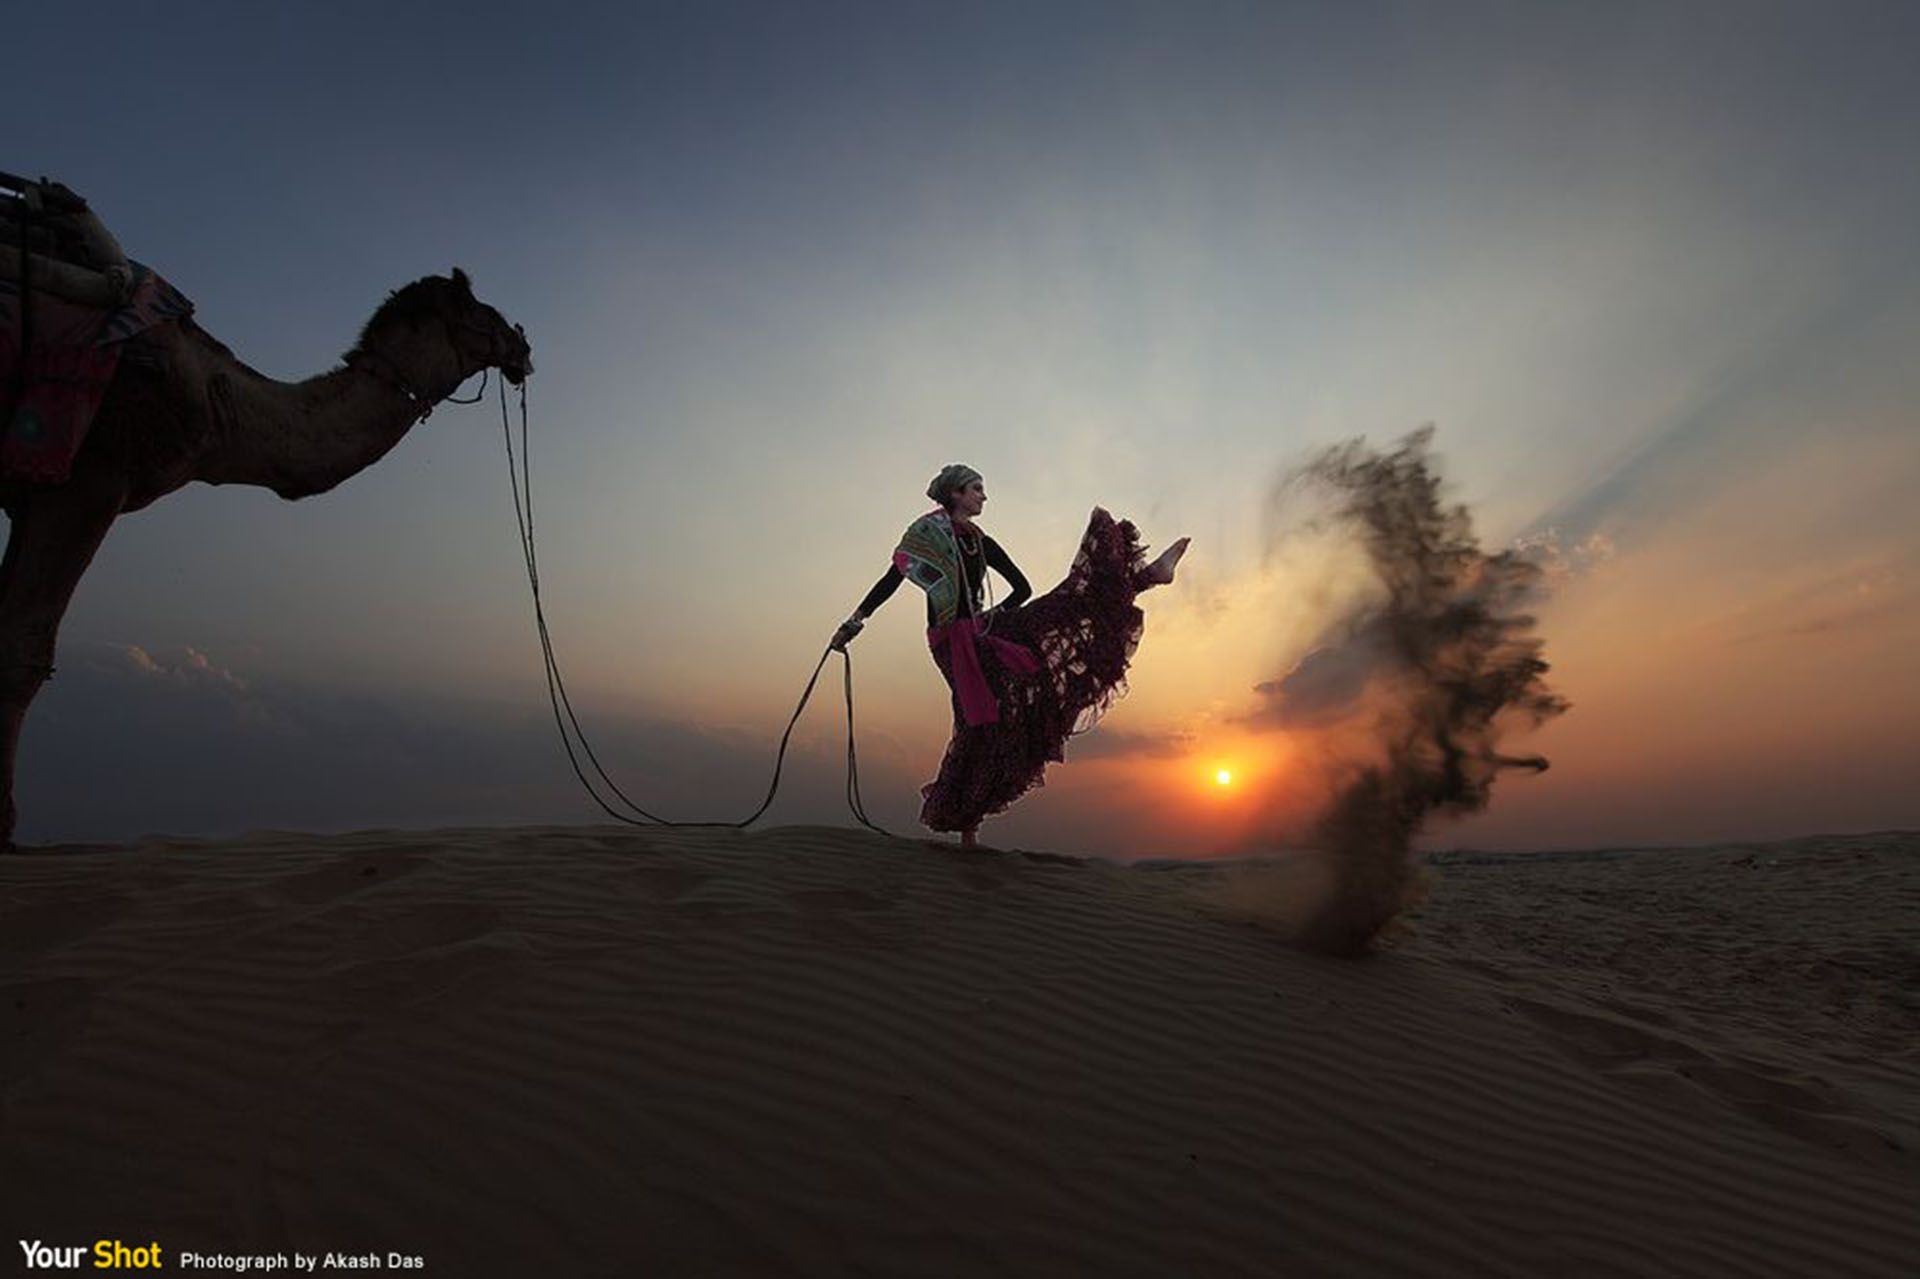 Photograph by Akash Das, National Geographic